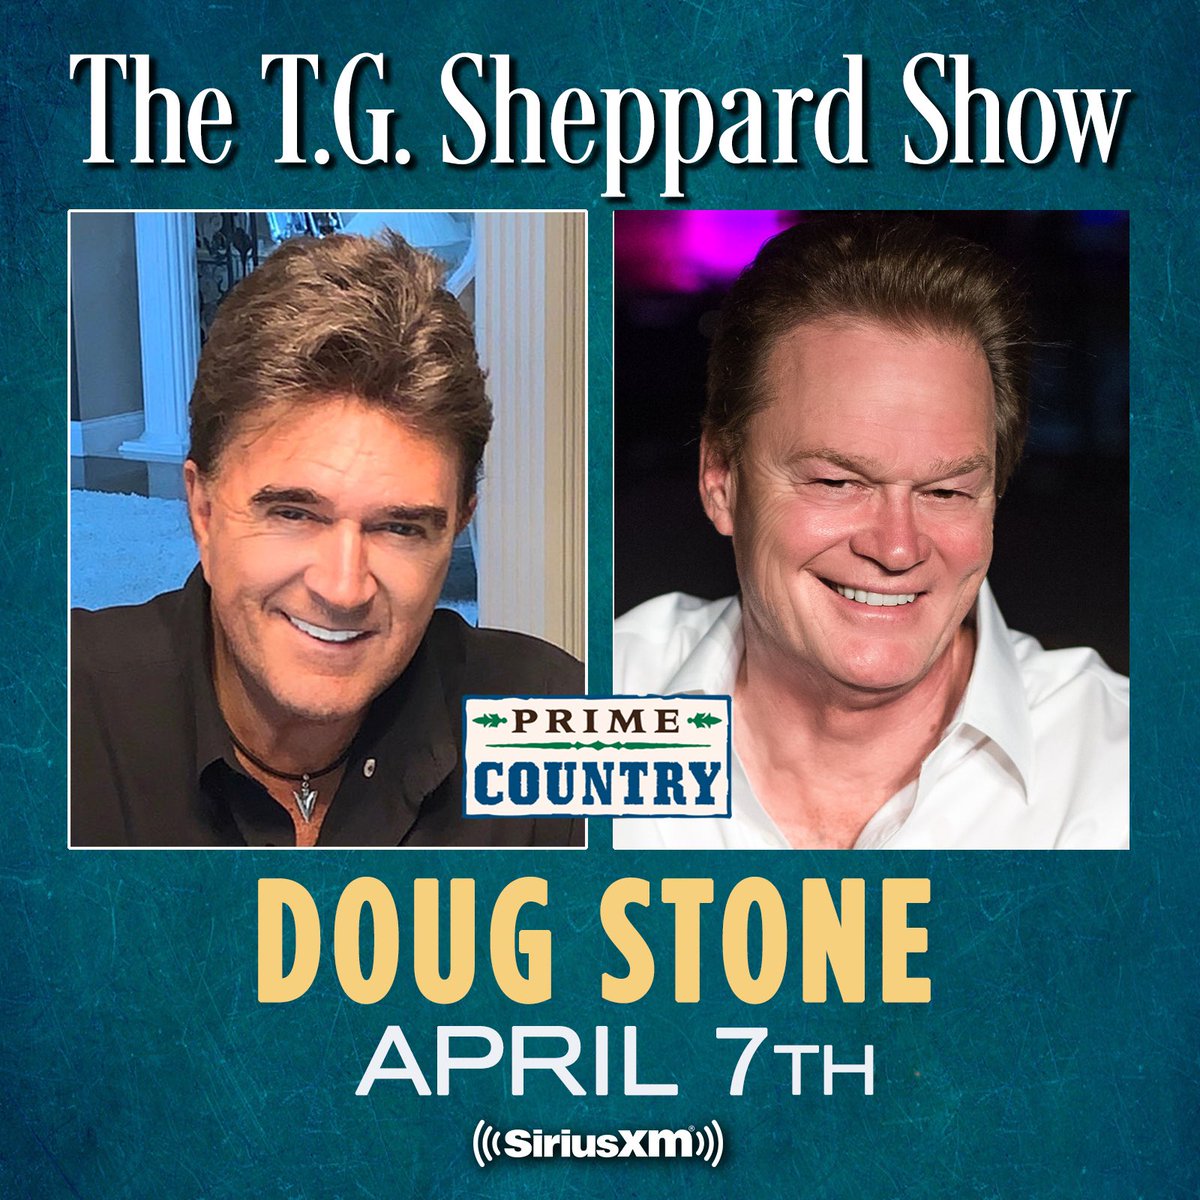 Don’t miss The TG Sheppard Show with this weeks guest Doug Stone on Prime Country (Channel 58)! Make sure to tune in on Prime Country at 3pmET/2pmCT on Friday. Hear it again Saturdays 12amET and on Wednesdays 12pmET. @dougstonetour